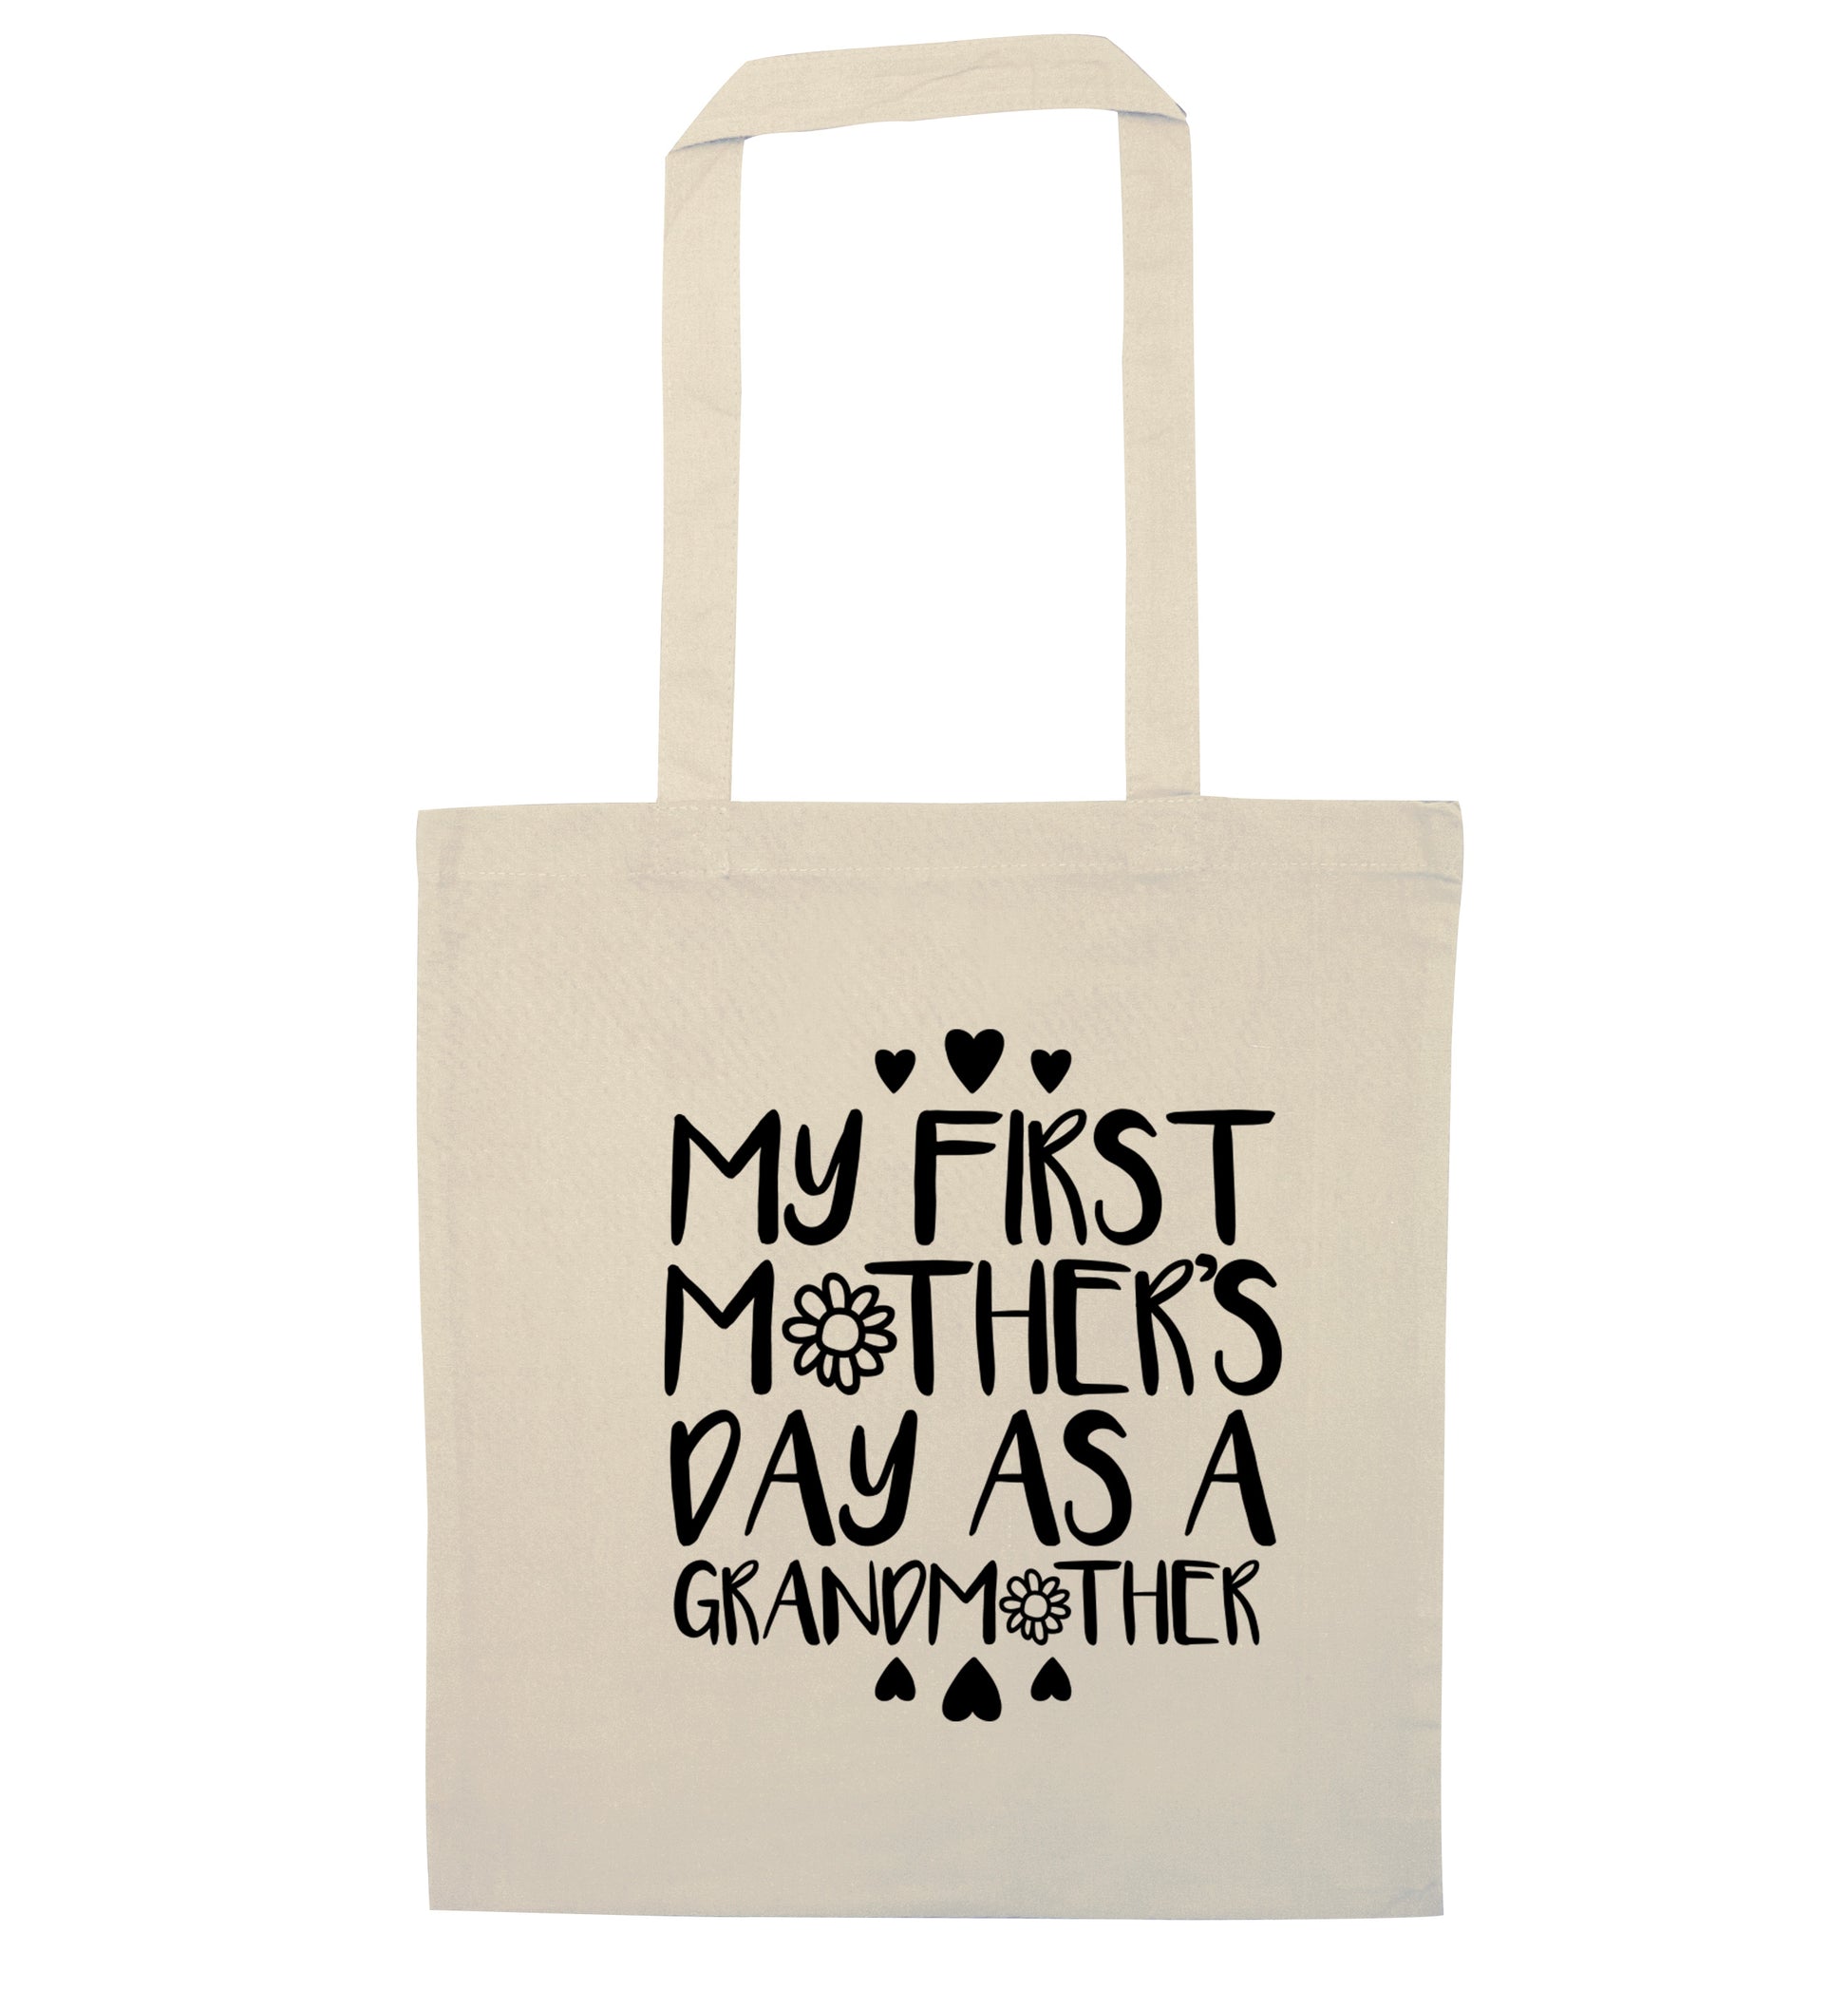 My first mother's day as a grandmother natural tote bag